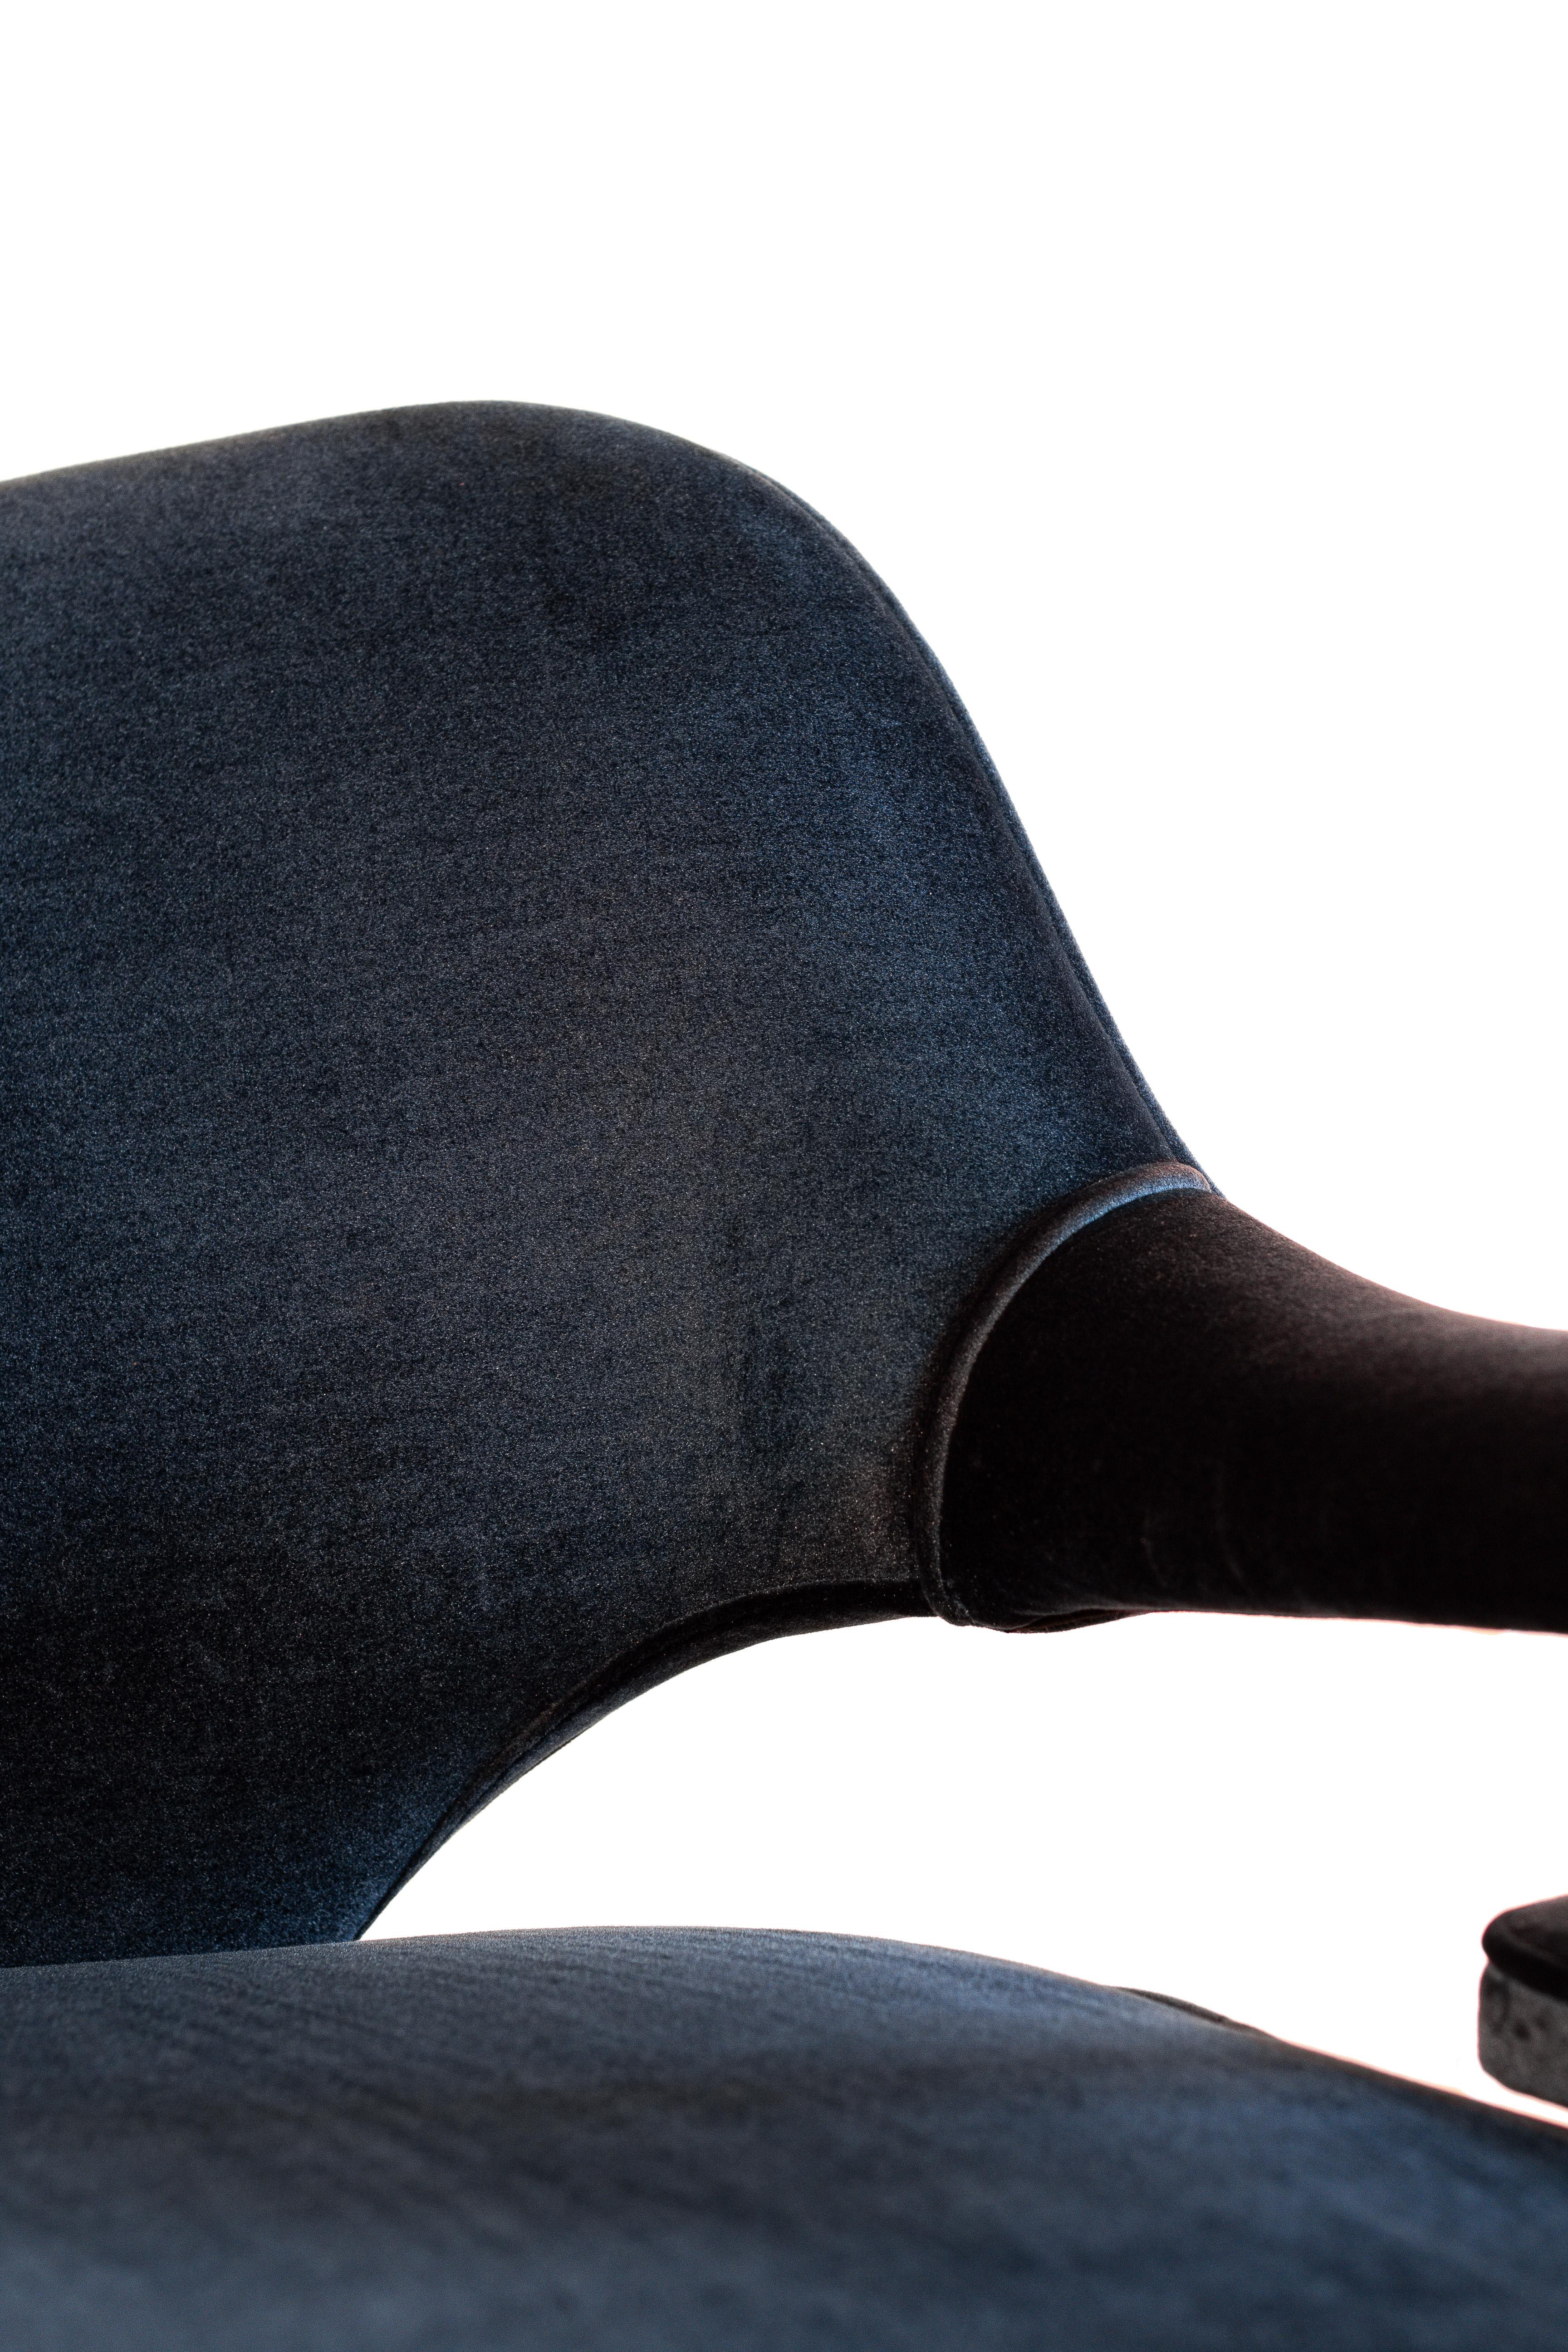 Mexican Stunning Pair of Midcentury Armchairs — Restored, Navy Blue Velveteen. For Sale